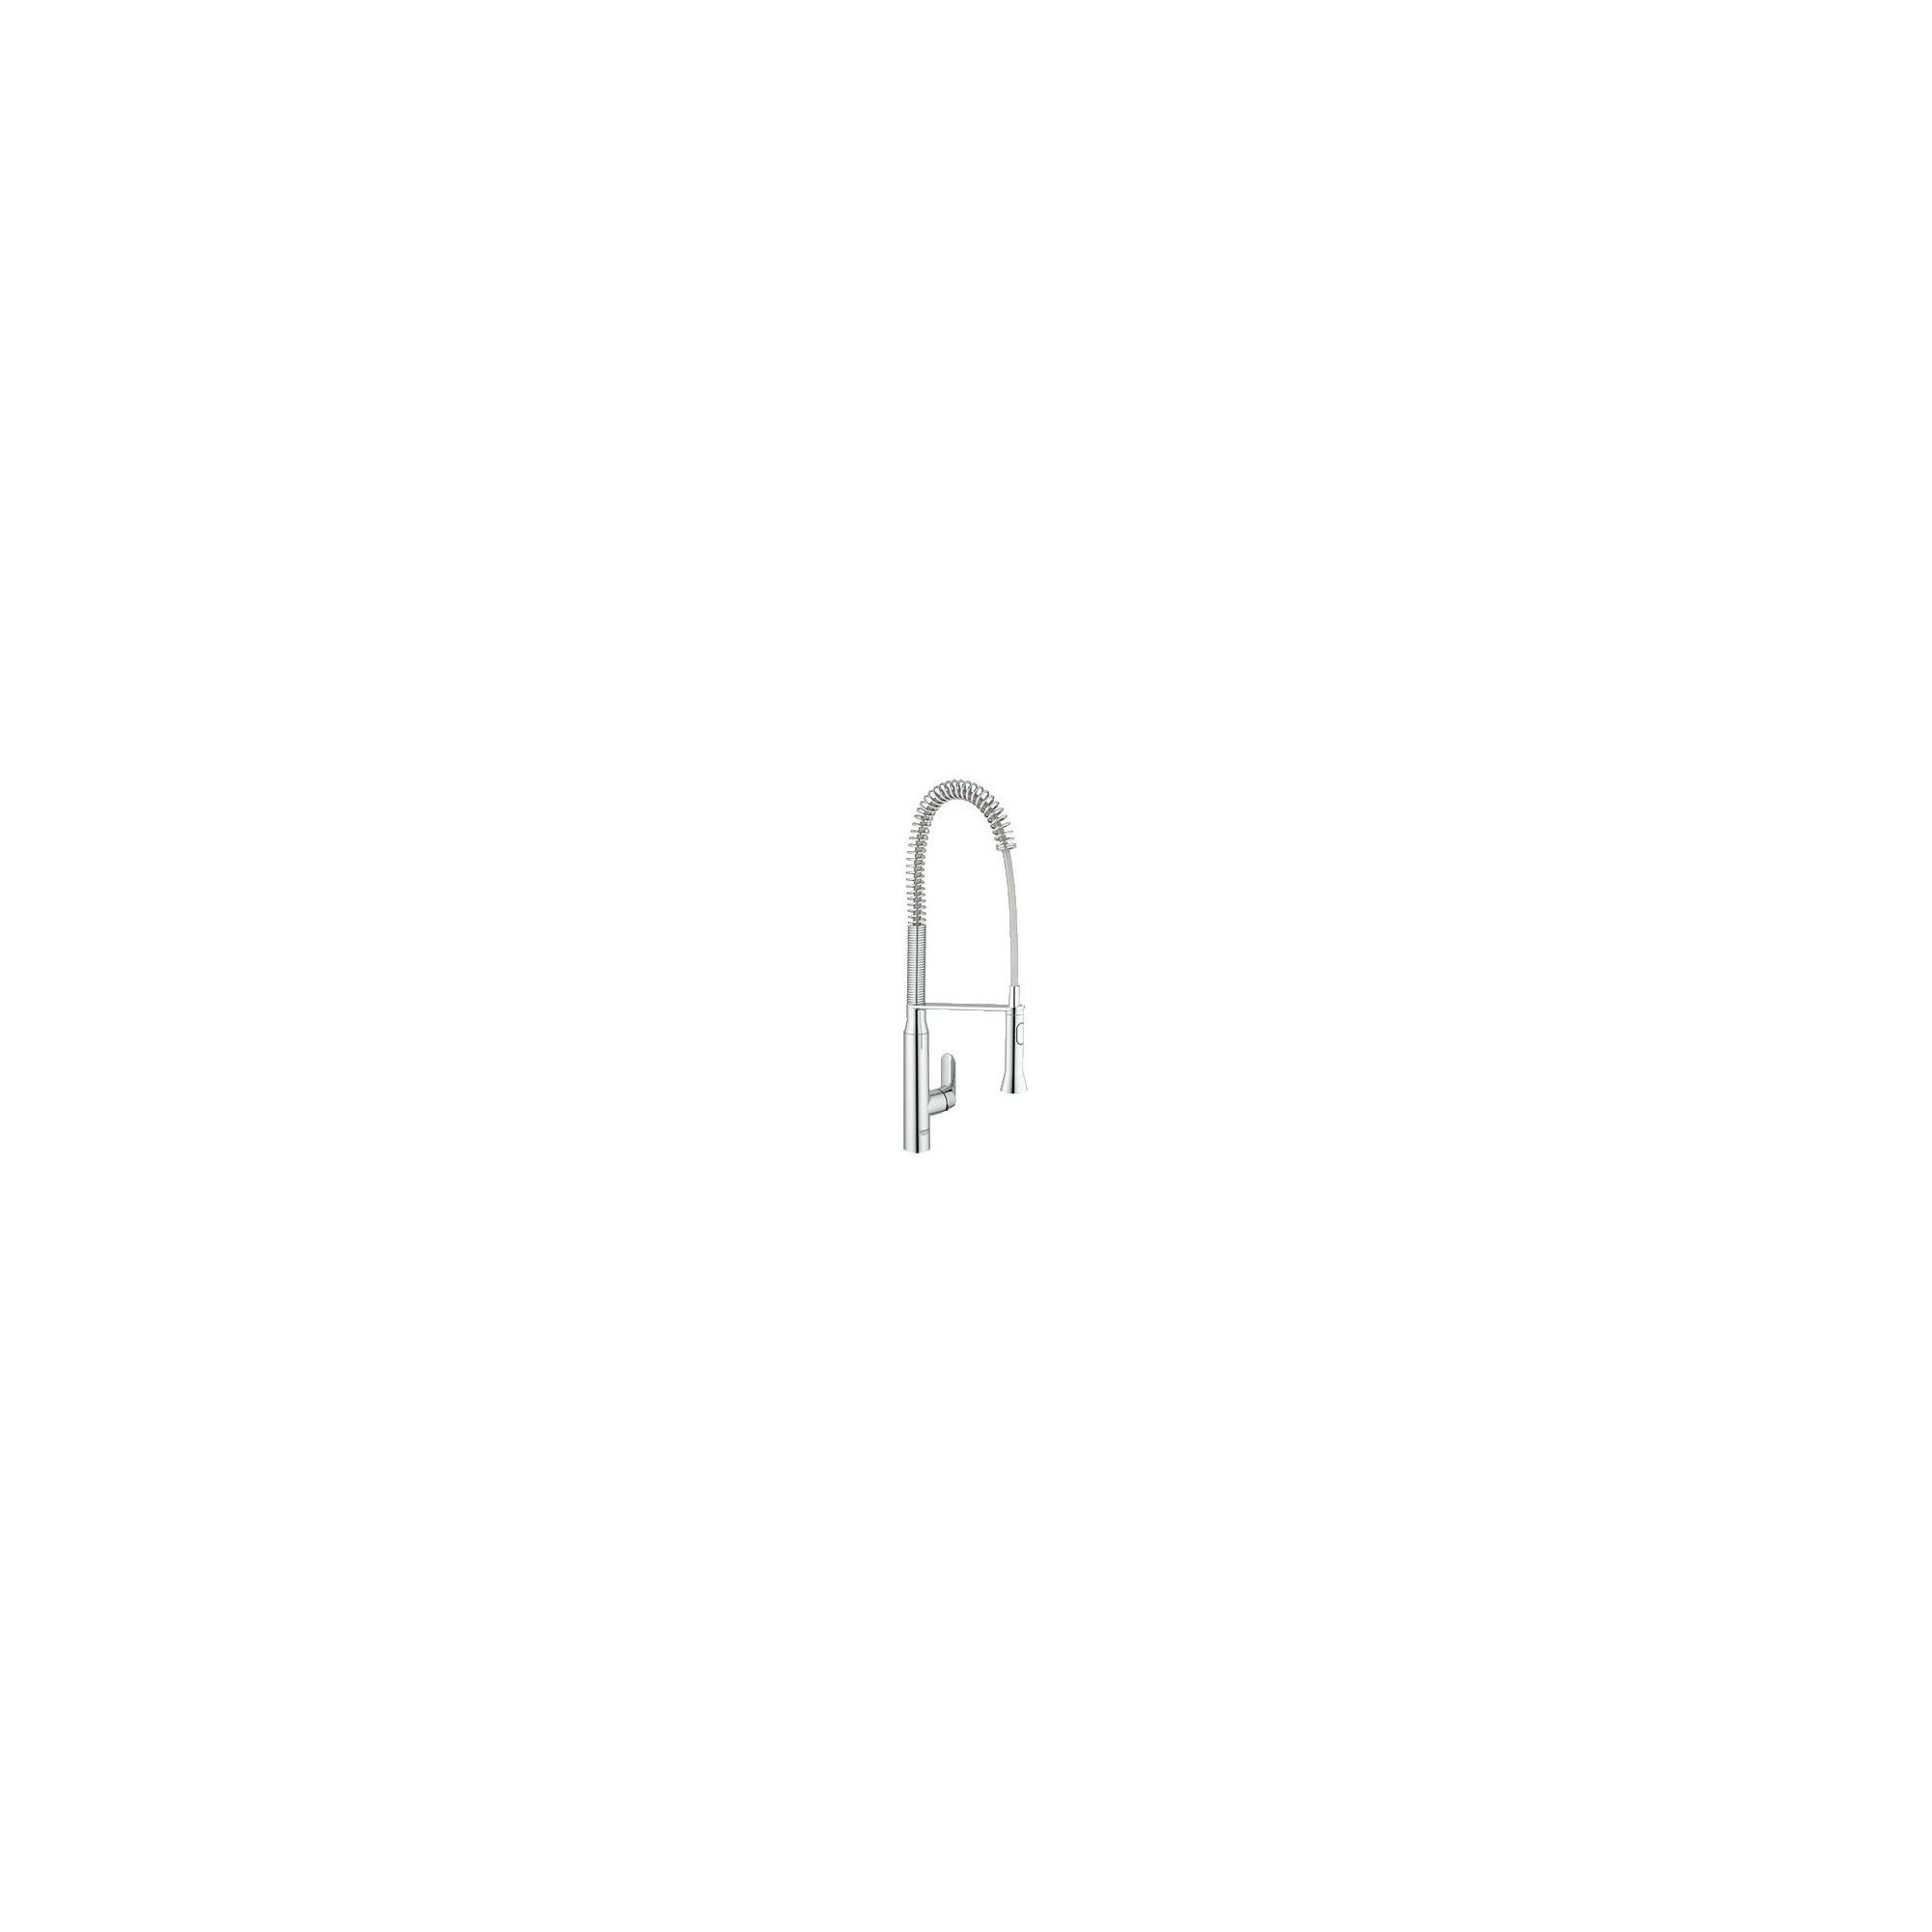 Grohe K7 Professional Mono Sink Mixer Tap, Single Handle, Chrome at Tesco Direct